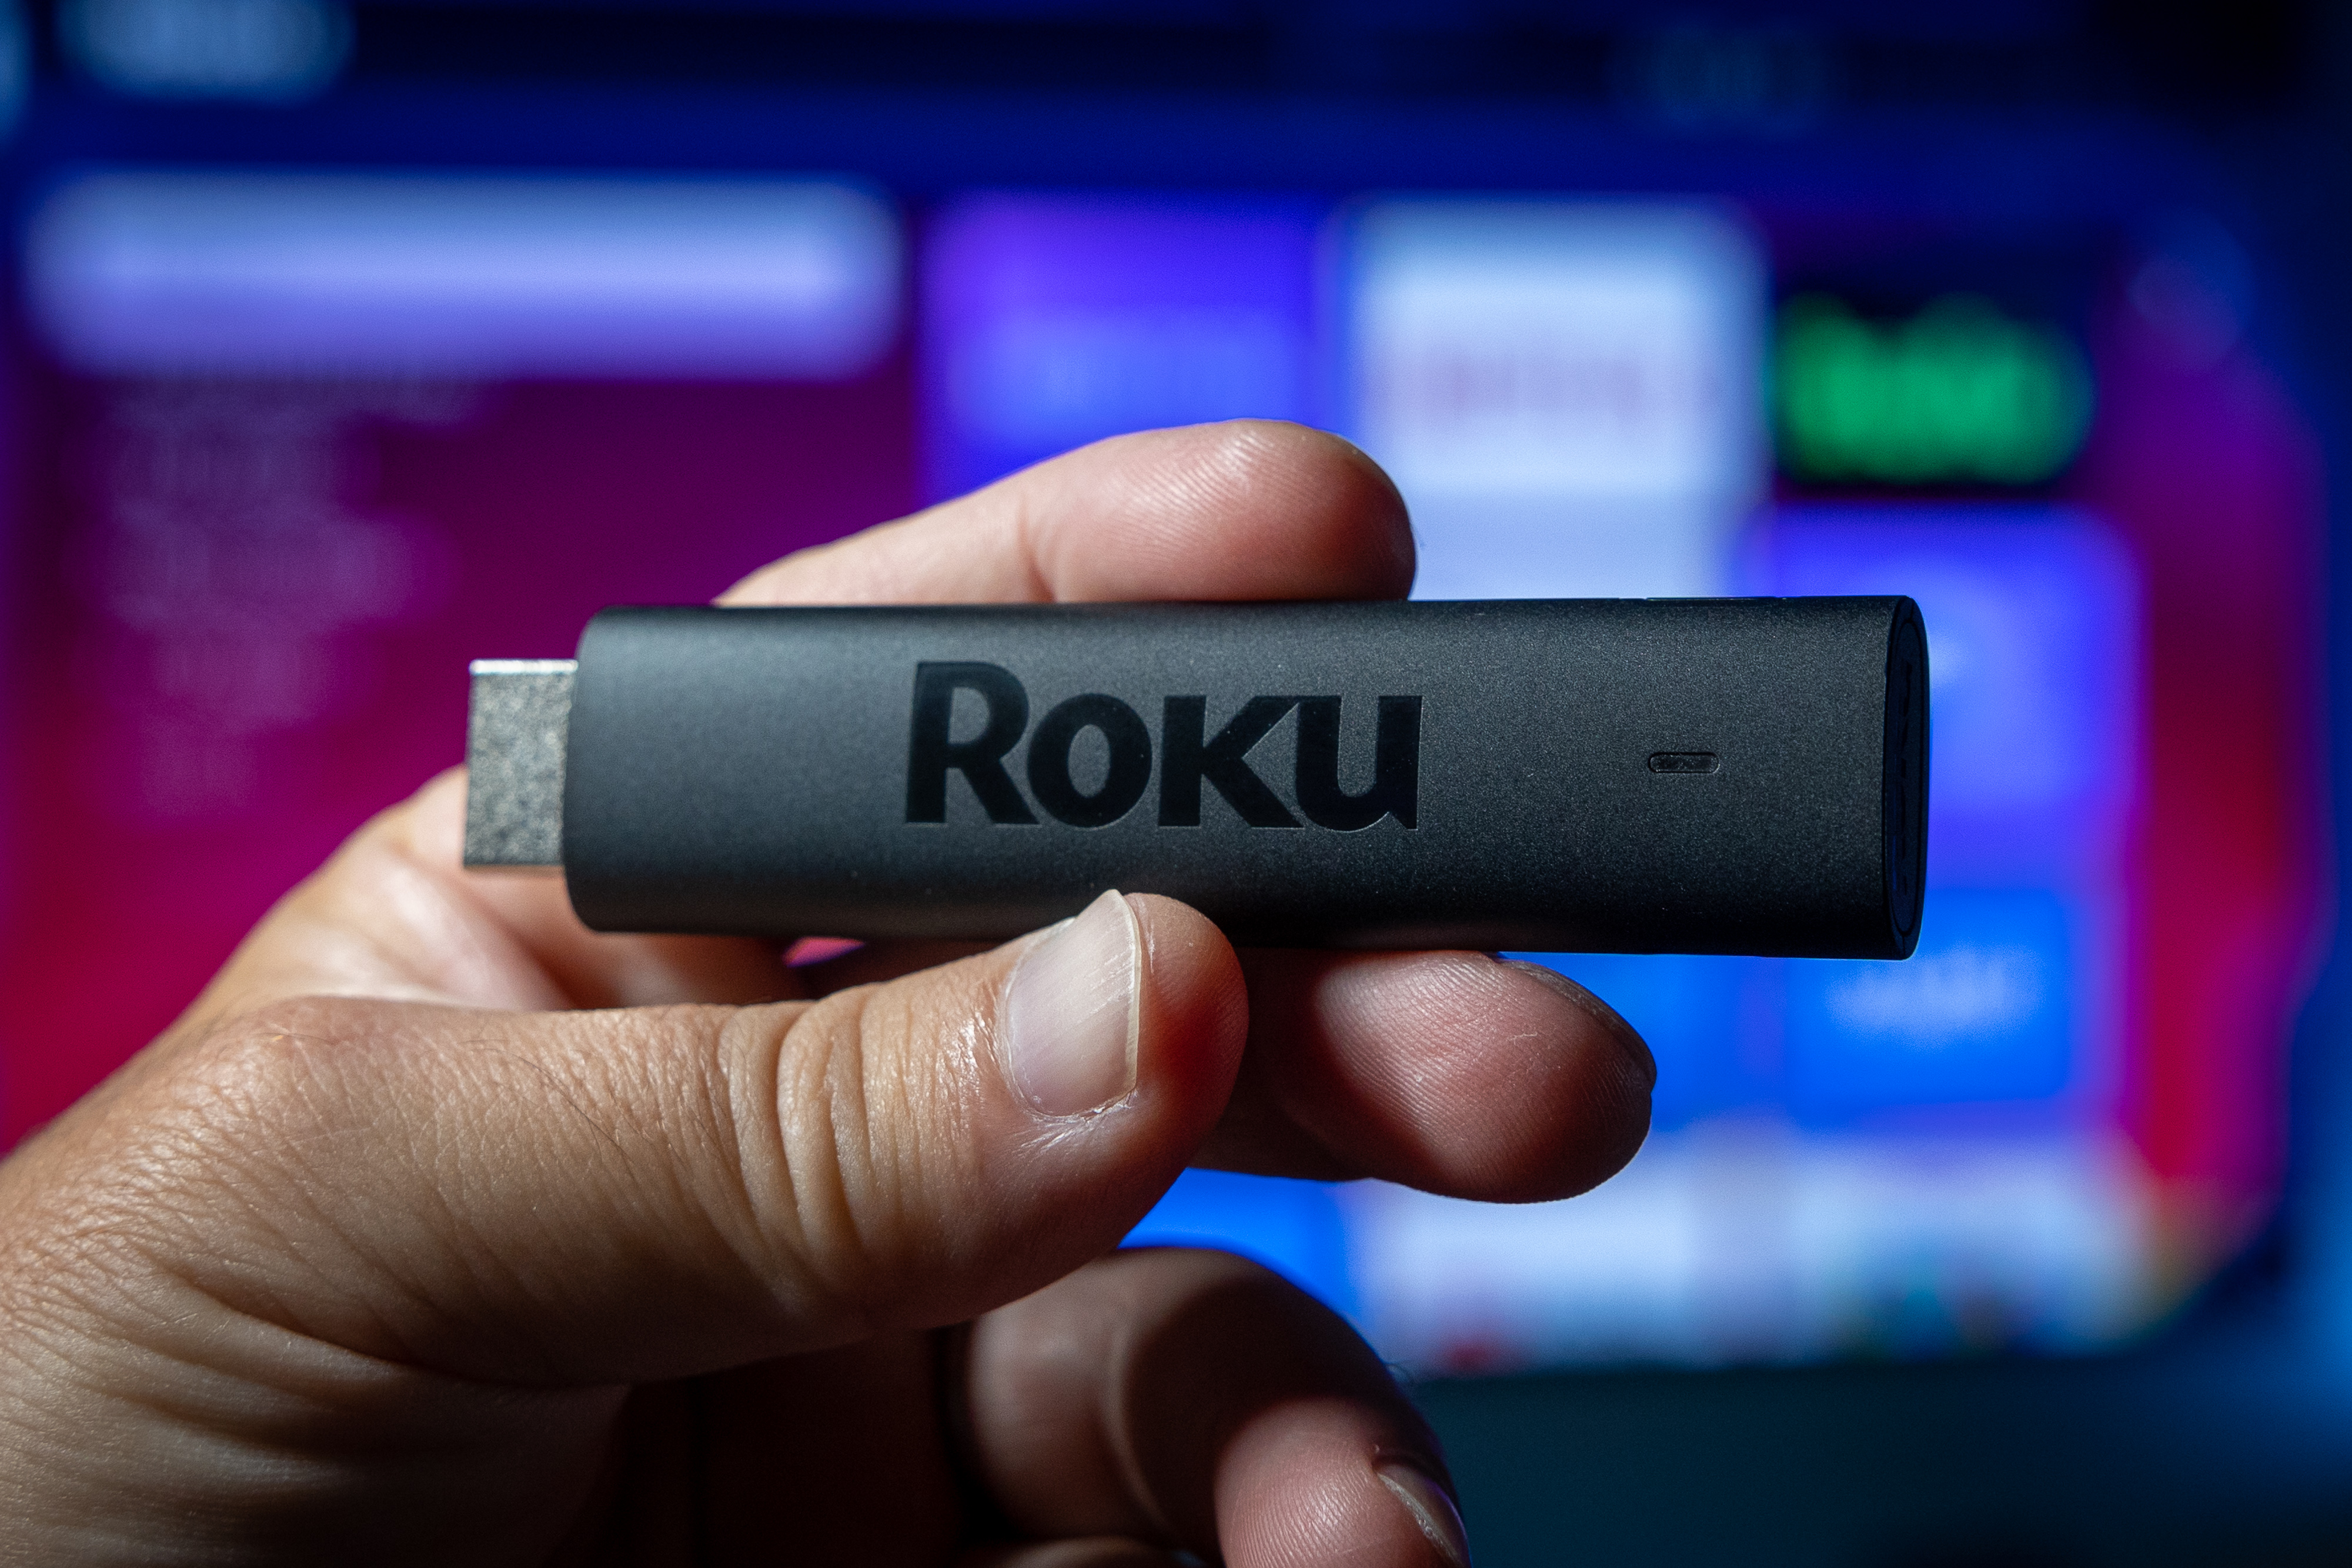 Roku unveils Streaming Stick 4K and 4K+ to rival 's Fire Stick 4K Max